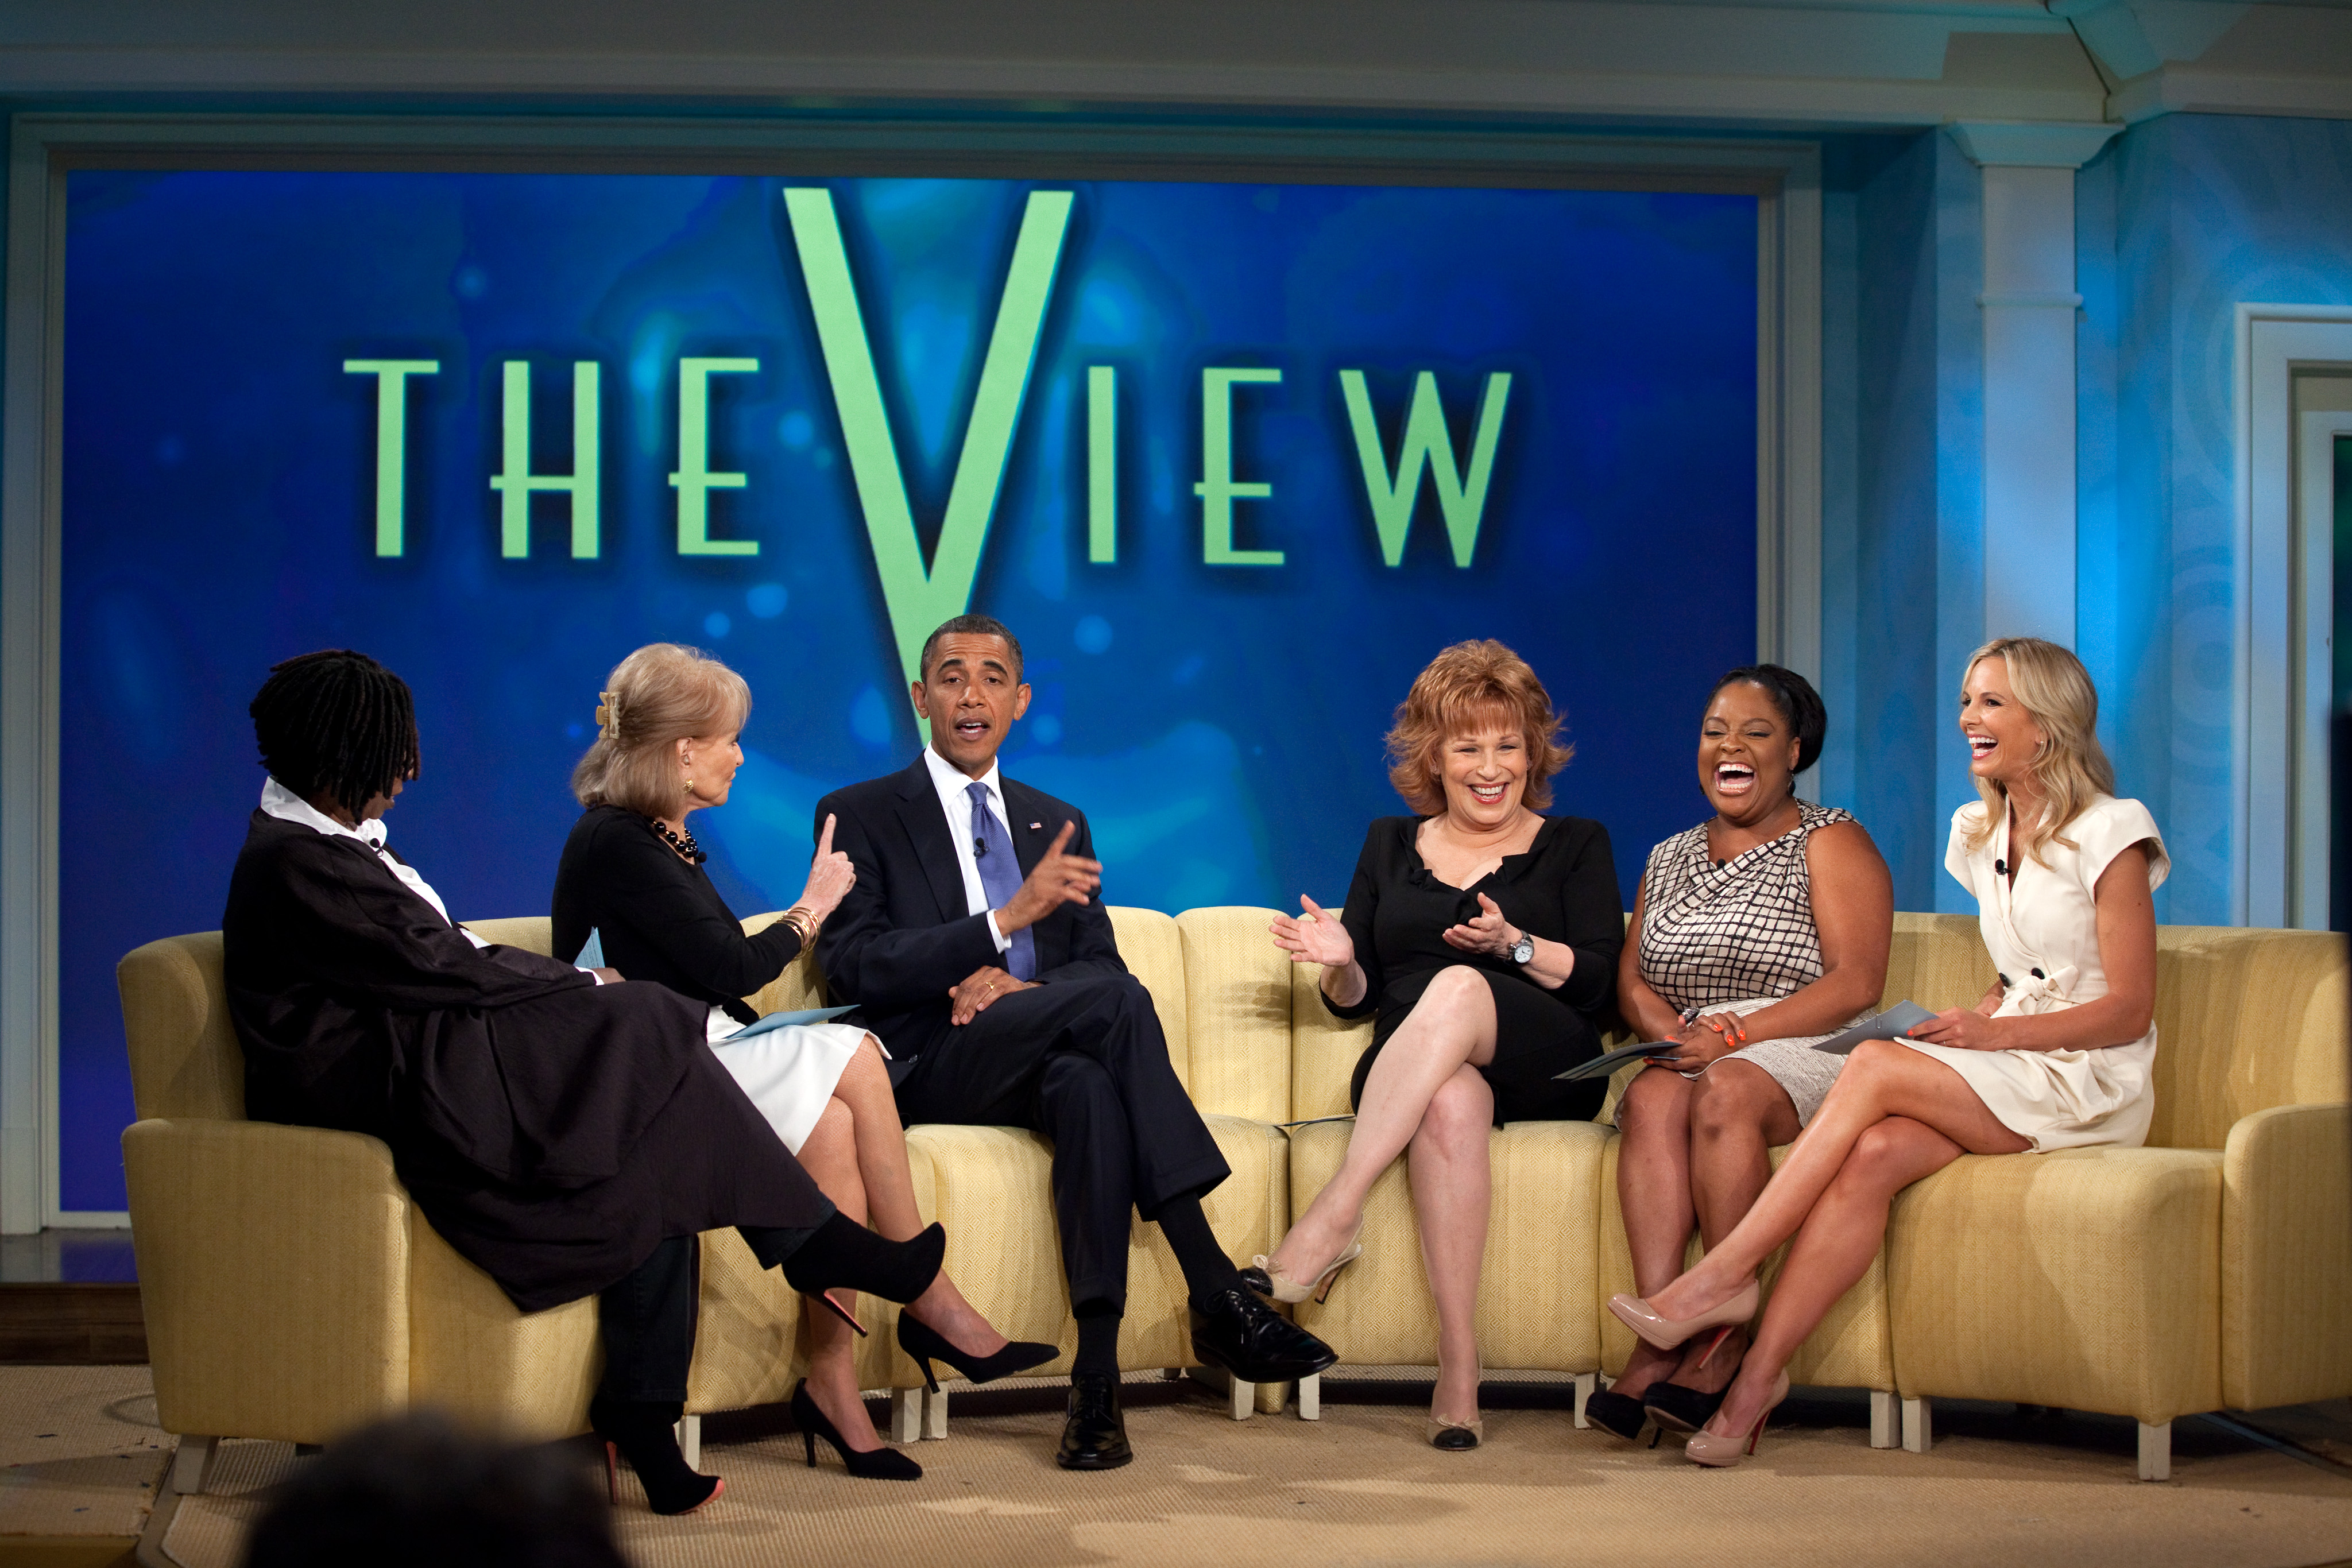 Former cheerleader addresses controversy on “The View”